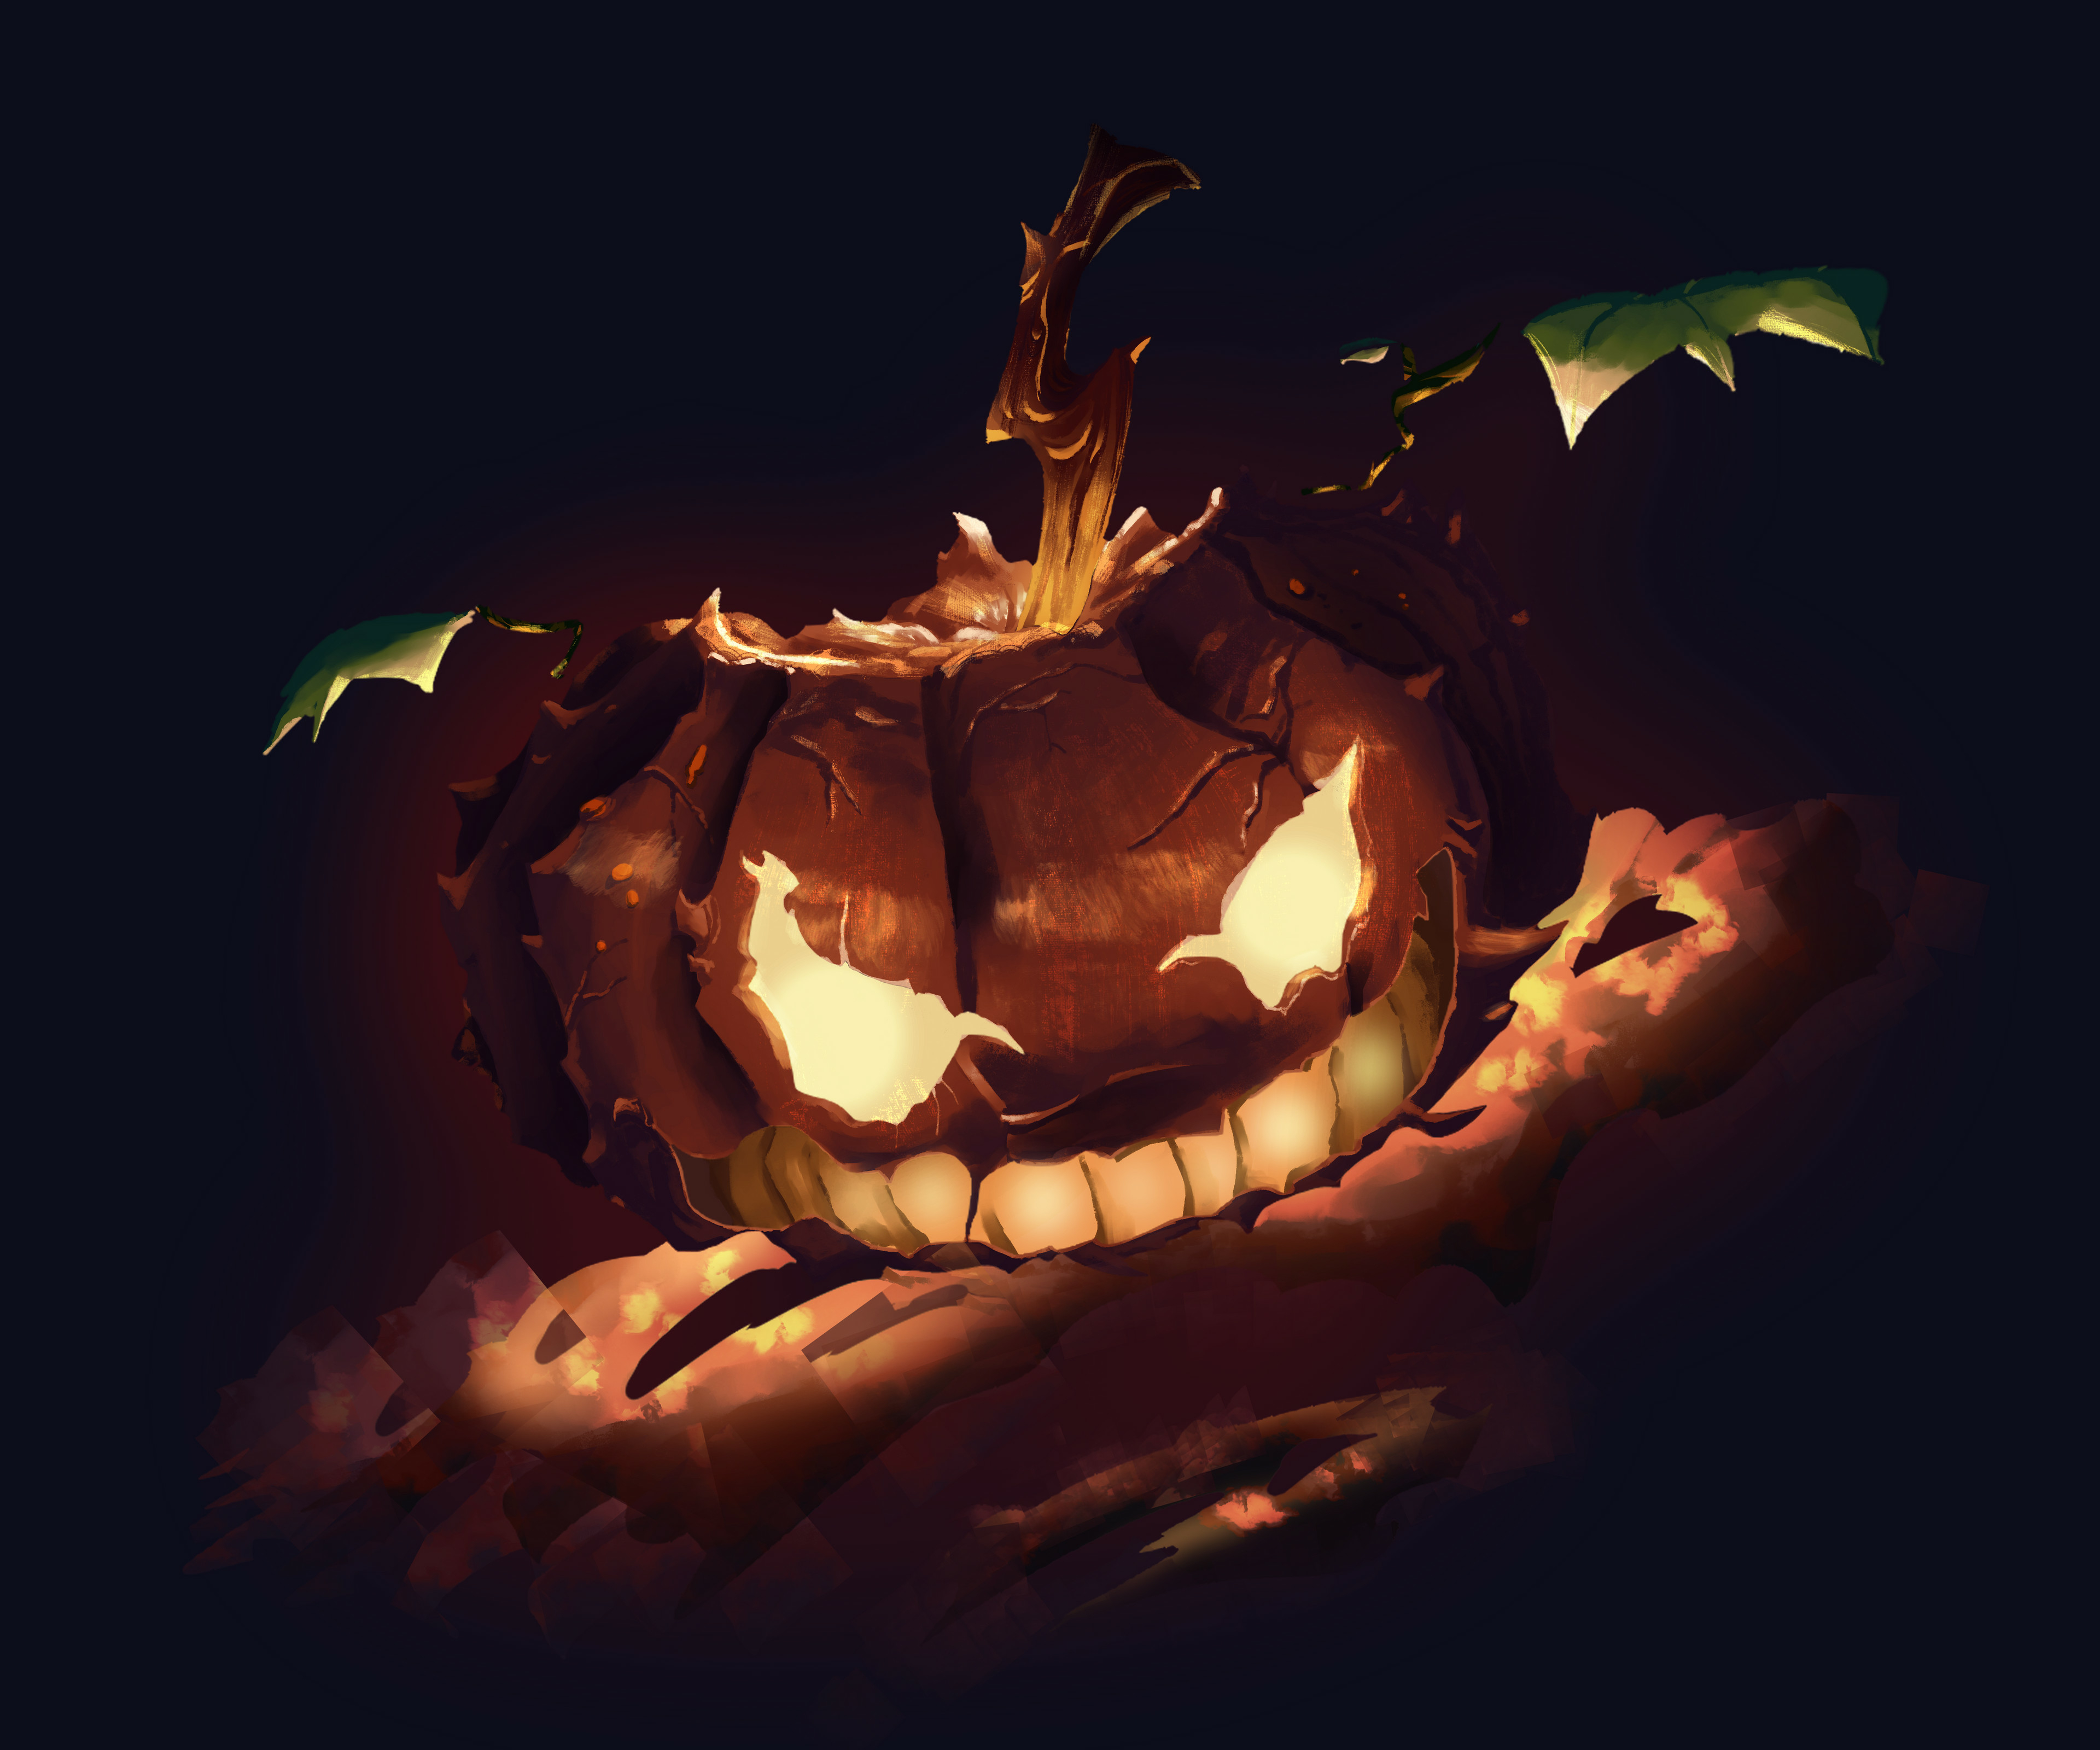 4K Halloween Wallpaper and Background Image